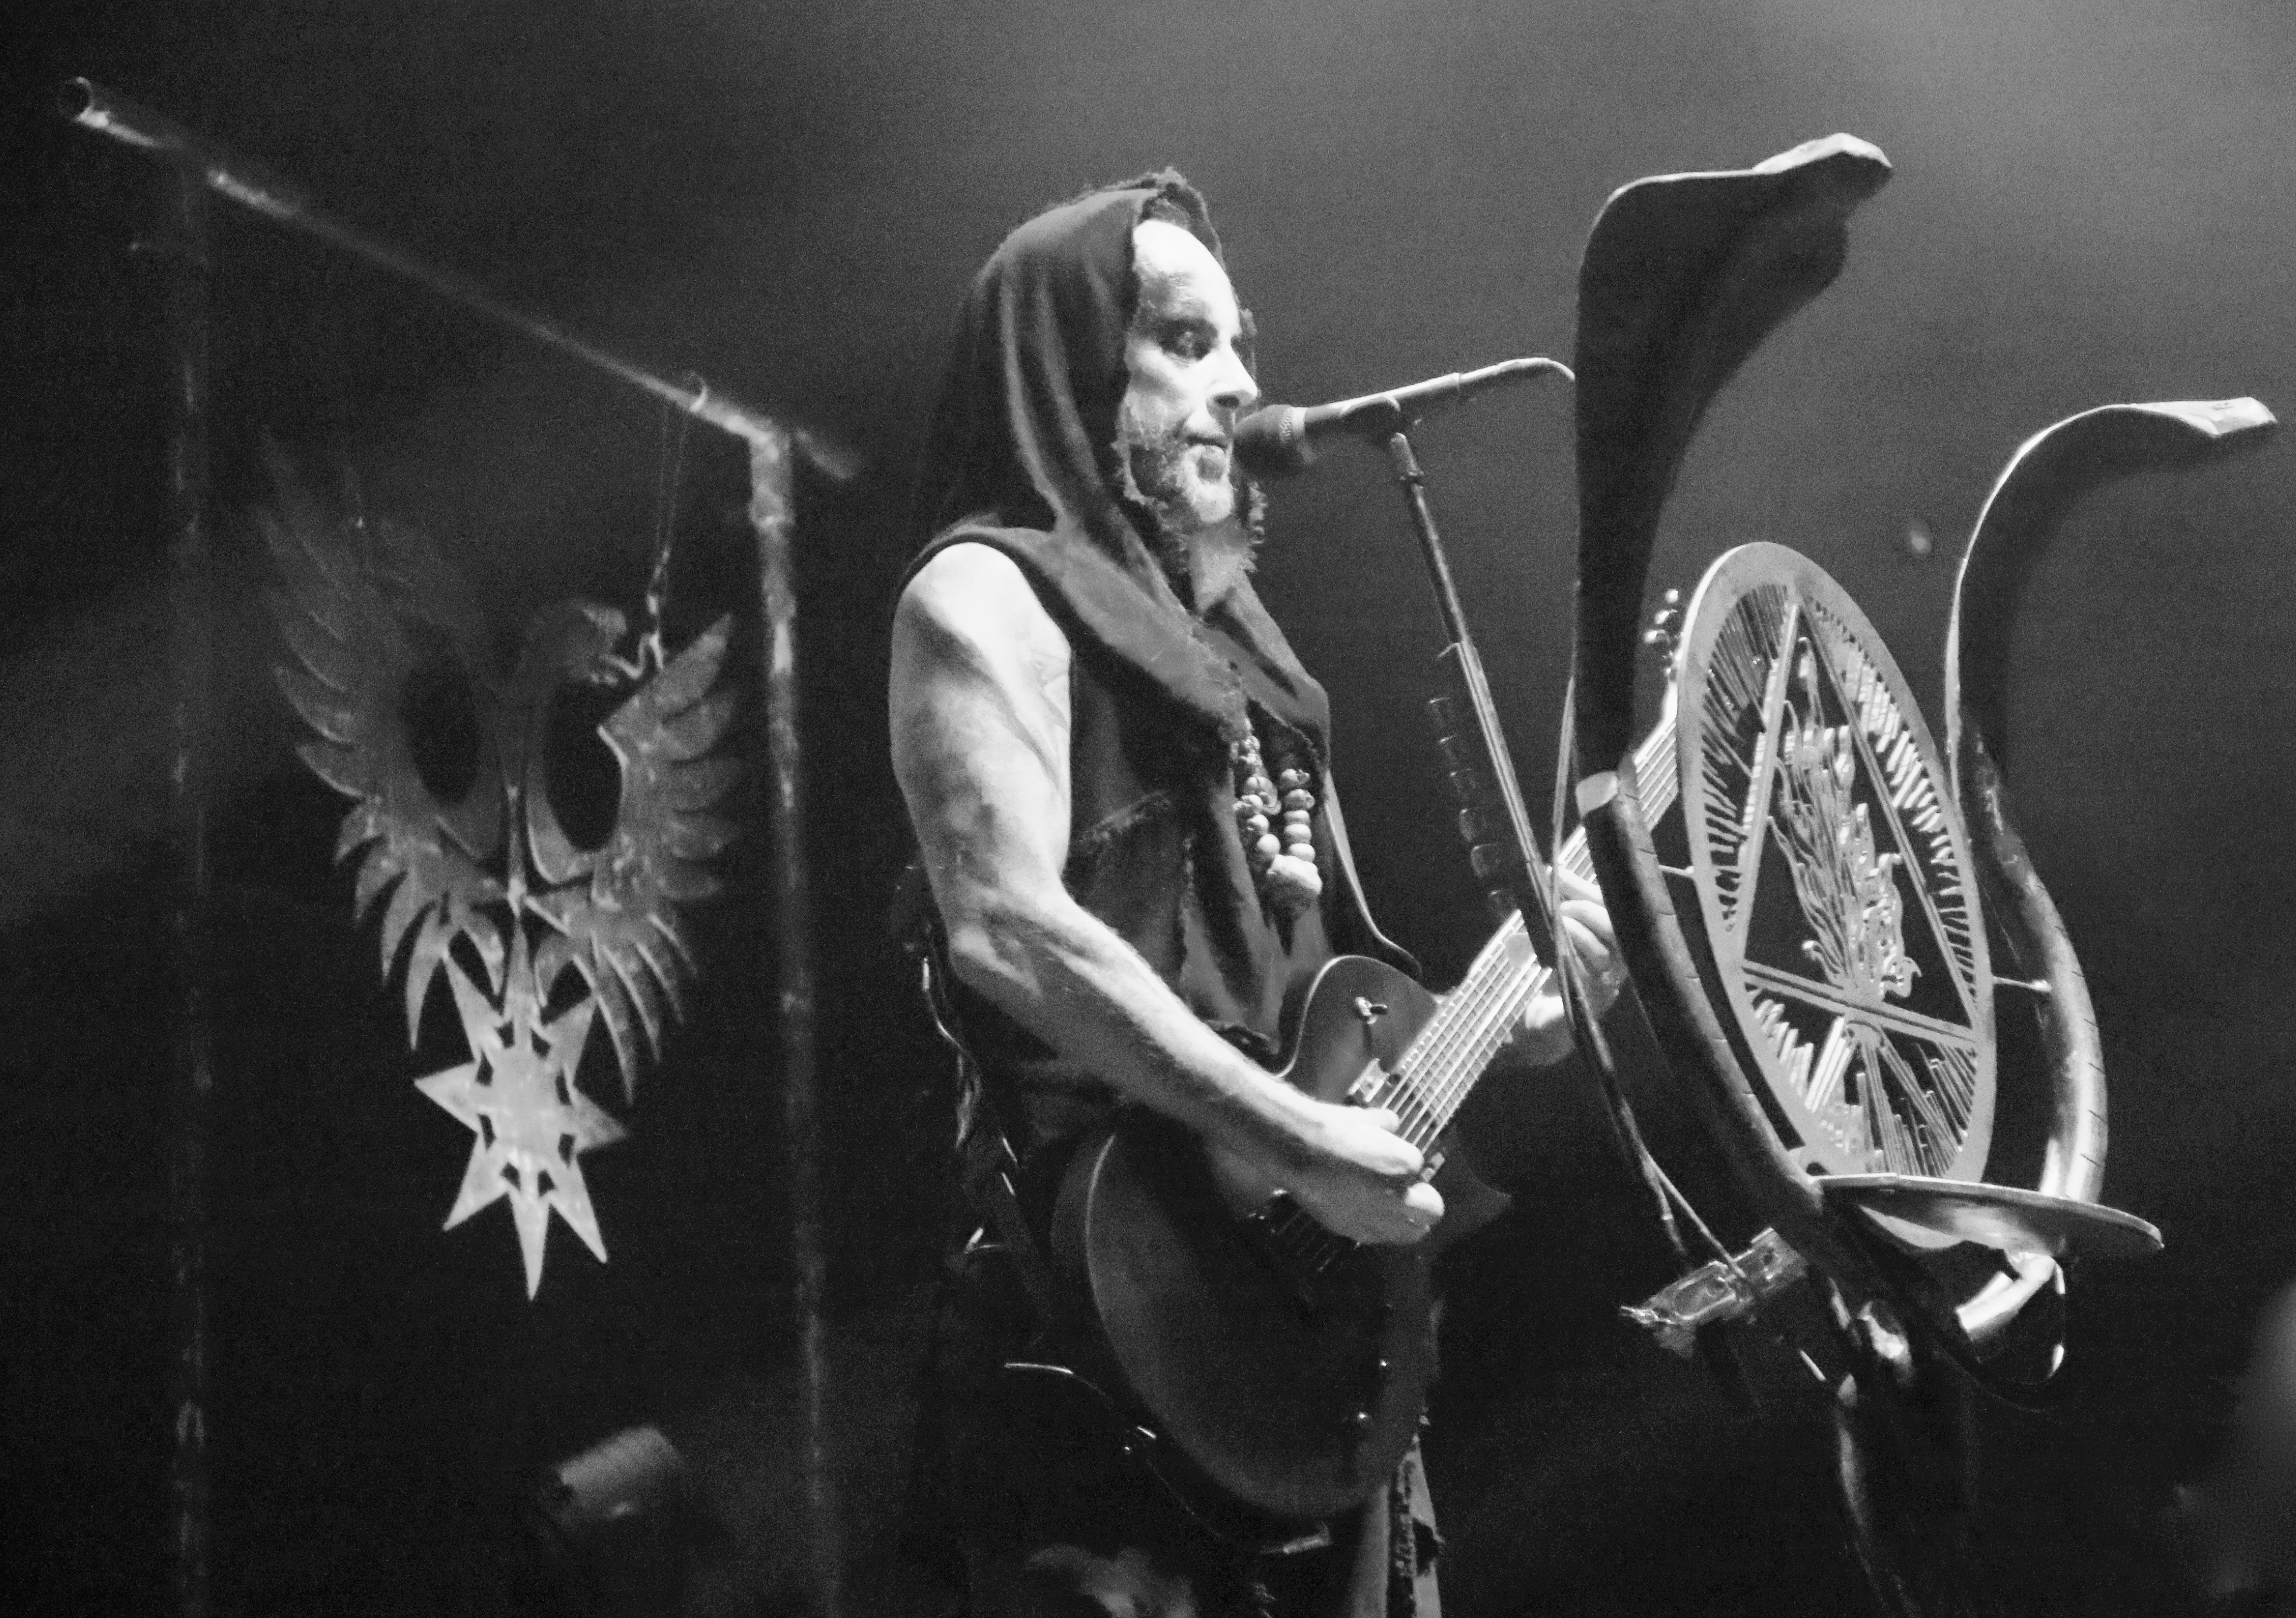 You must “say a prayer” to unlock new Behemoth song